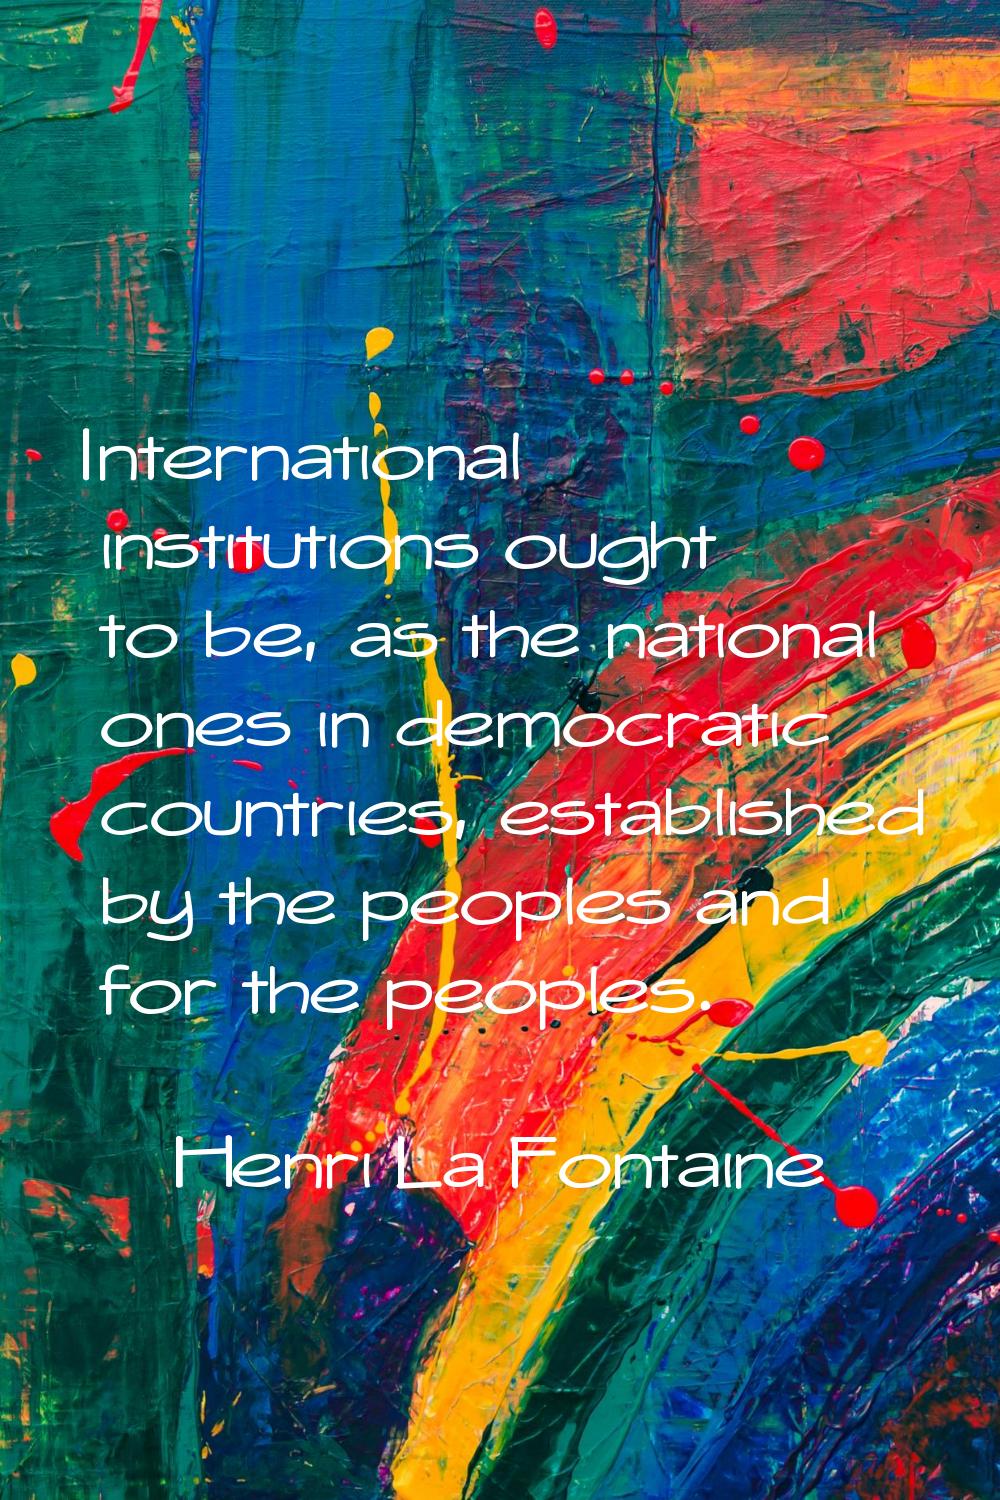 International institutions ought to be, as the national ones in democratic countries, established b